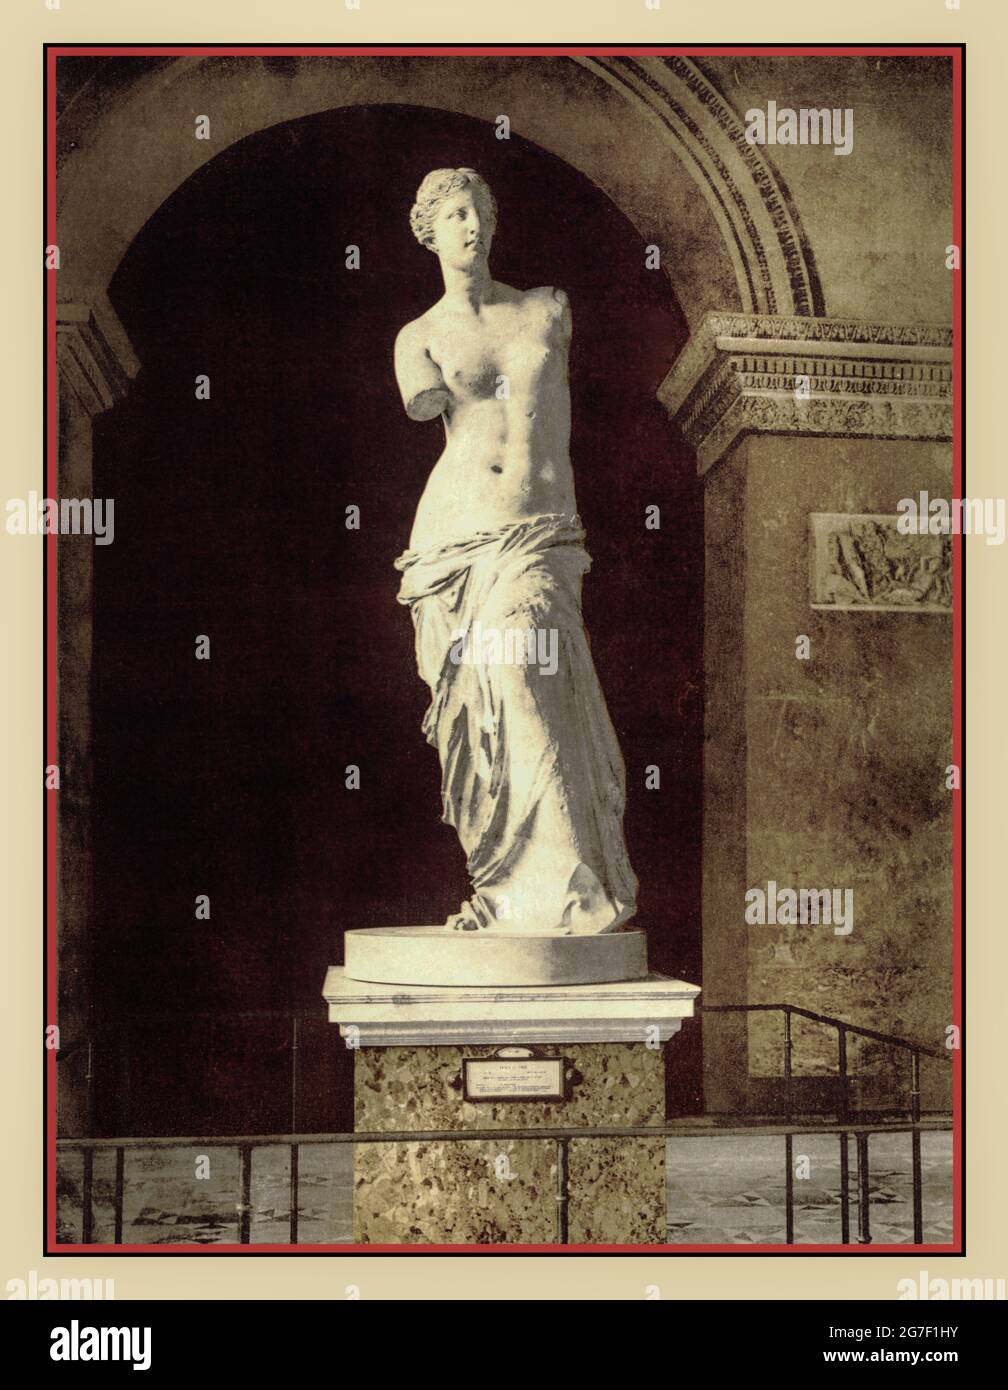 1900's Venus de Milo statue archive photochrom image  [The Louvre, the Venus de Milo, Paris, France] 'Aphrodite de Milos' Photochrom prints--Color--1890-1900.The Venus de Milo has been prominently displayed at the Louvre Museum in Paris since shortly after the statue was rediscovered on the island of Milos, Greece in 1820.statue is believed to depict Aphrodite, the Greek goddess of love and beauty, and it bears the name of Venus, Stock Photo